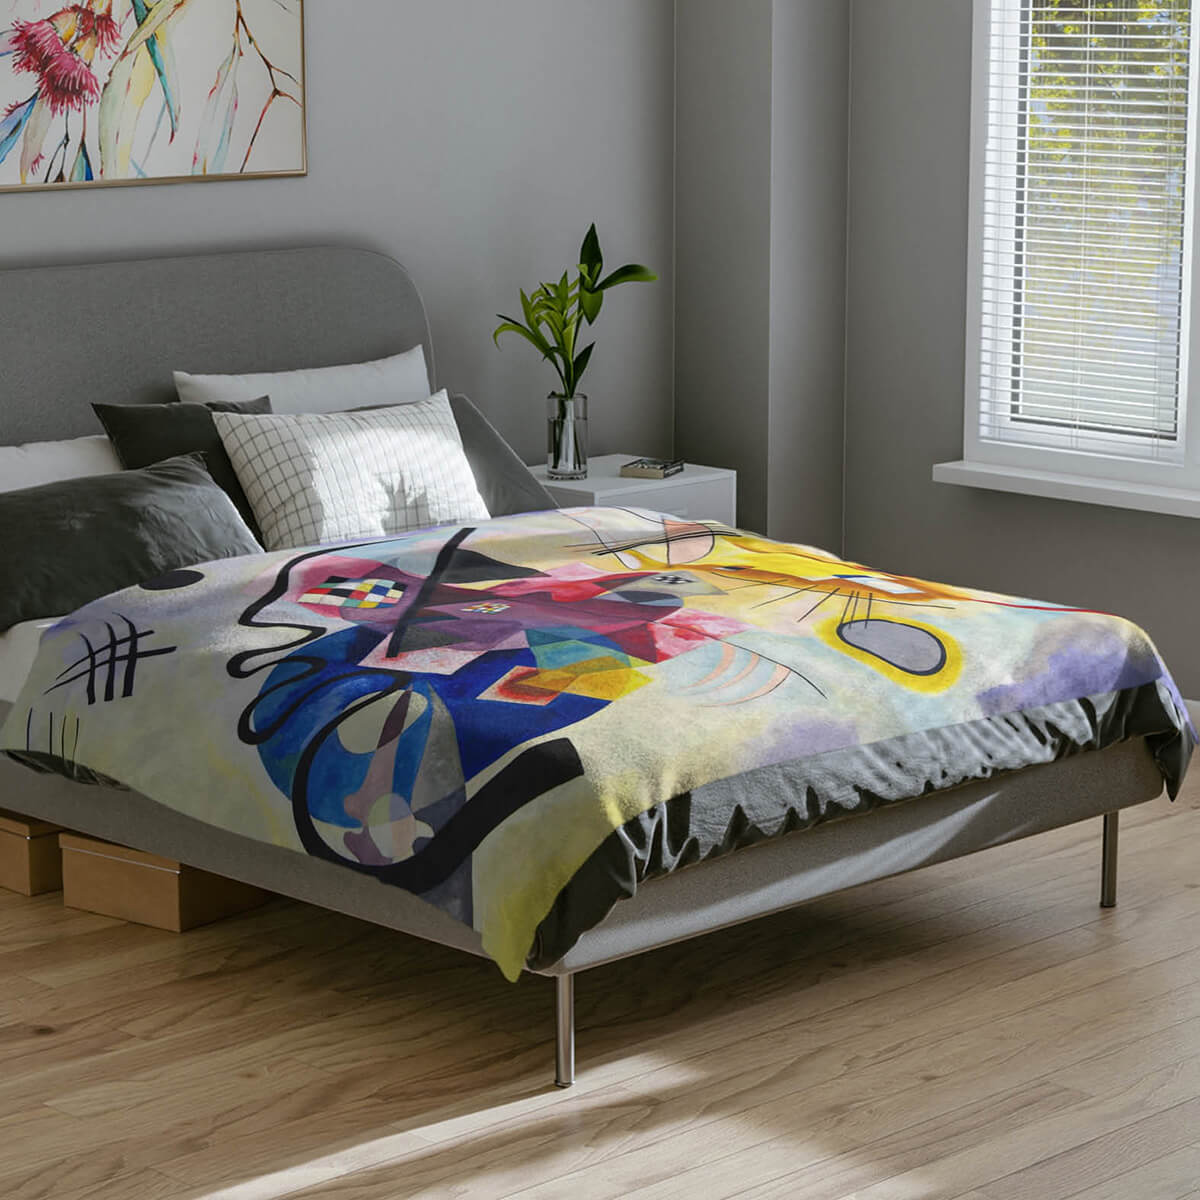 Colorful couch blanket with contemporary art pattern